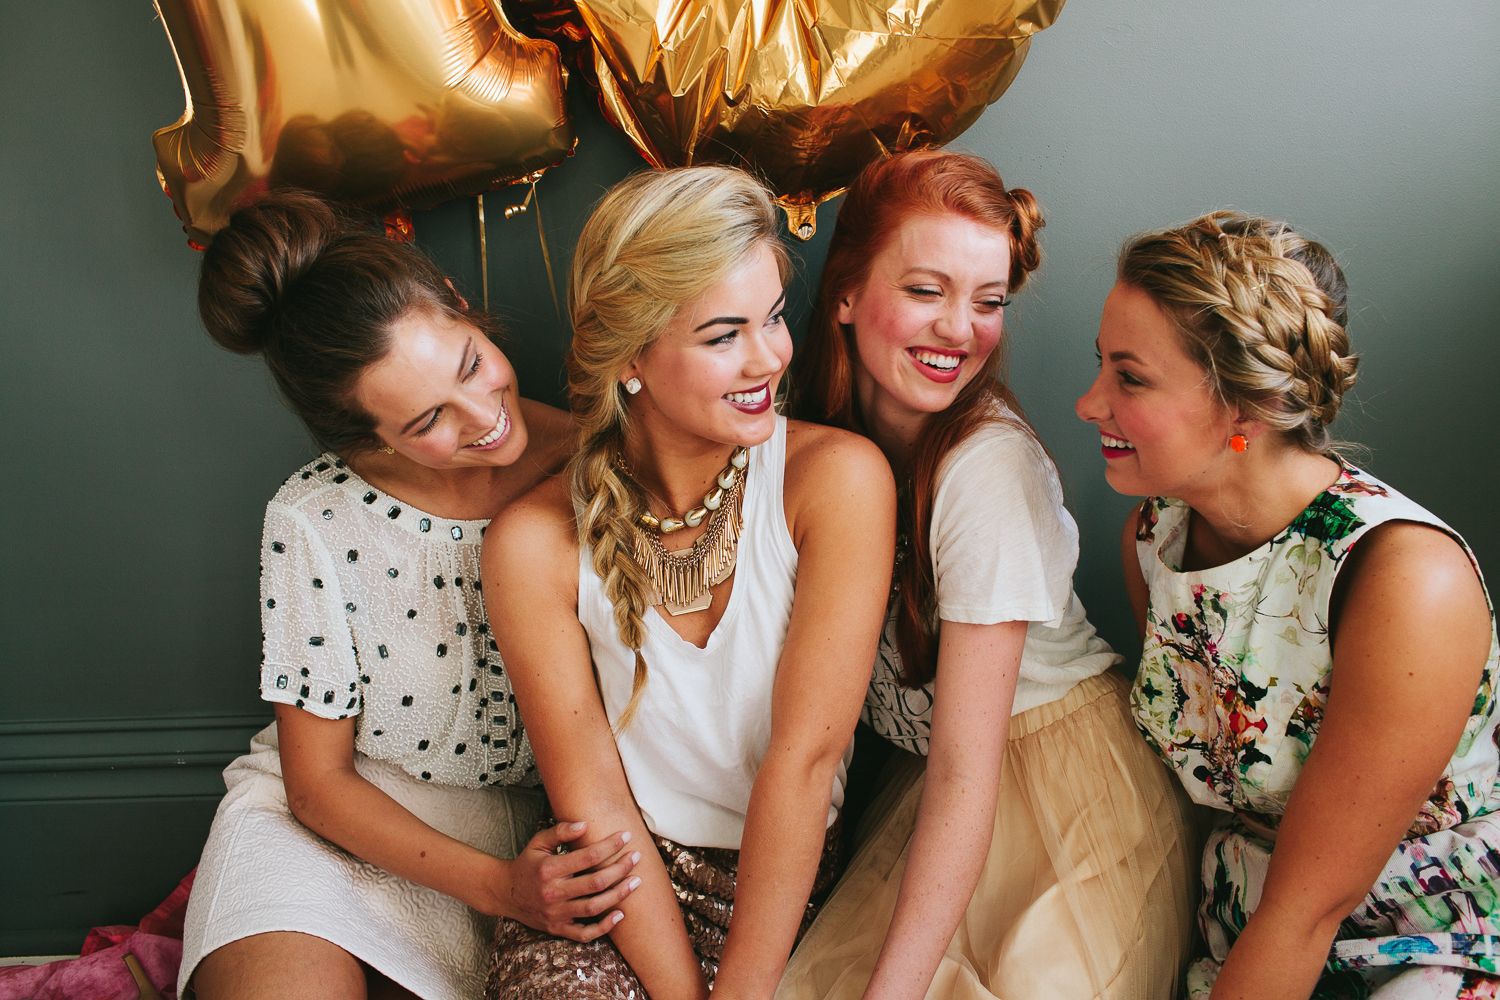  Girls Just Wanna Have Fun | Styled Shoot - to see more: http://www.theperfectpalette.com/2014/03/girls-just-wanna-have-fun-styled-shoot.html - photo by Brooke Stapleton, styled by Rachael Ellen Events